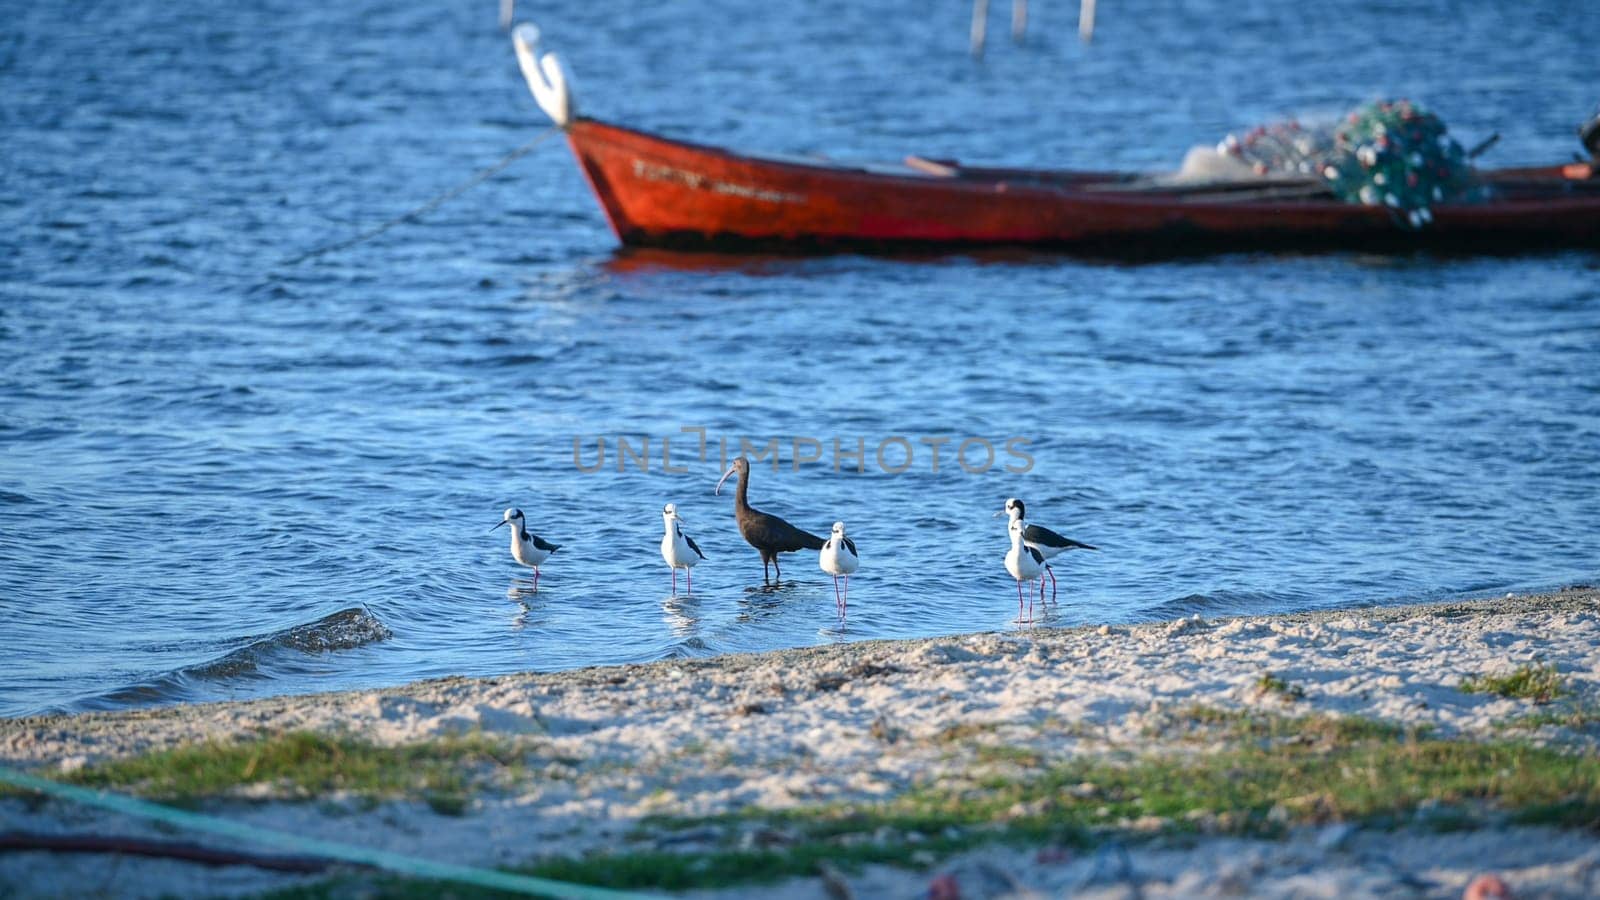 Birds and Fishing boat in the Laguna de Rocha in La Paloma in the protected area in Uruguay. by martinscphoto